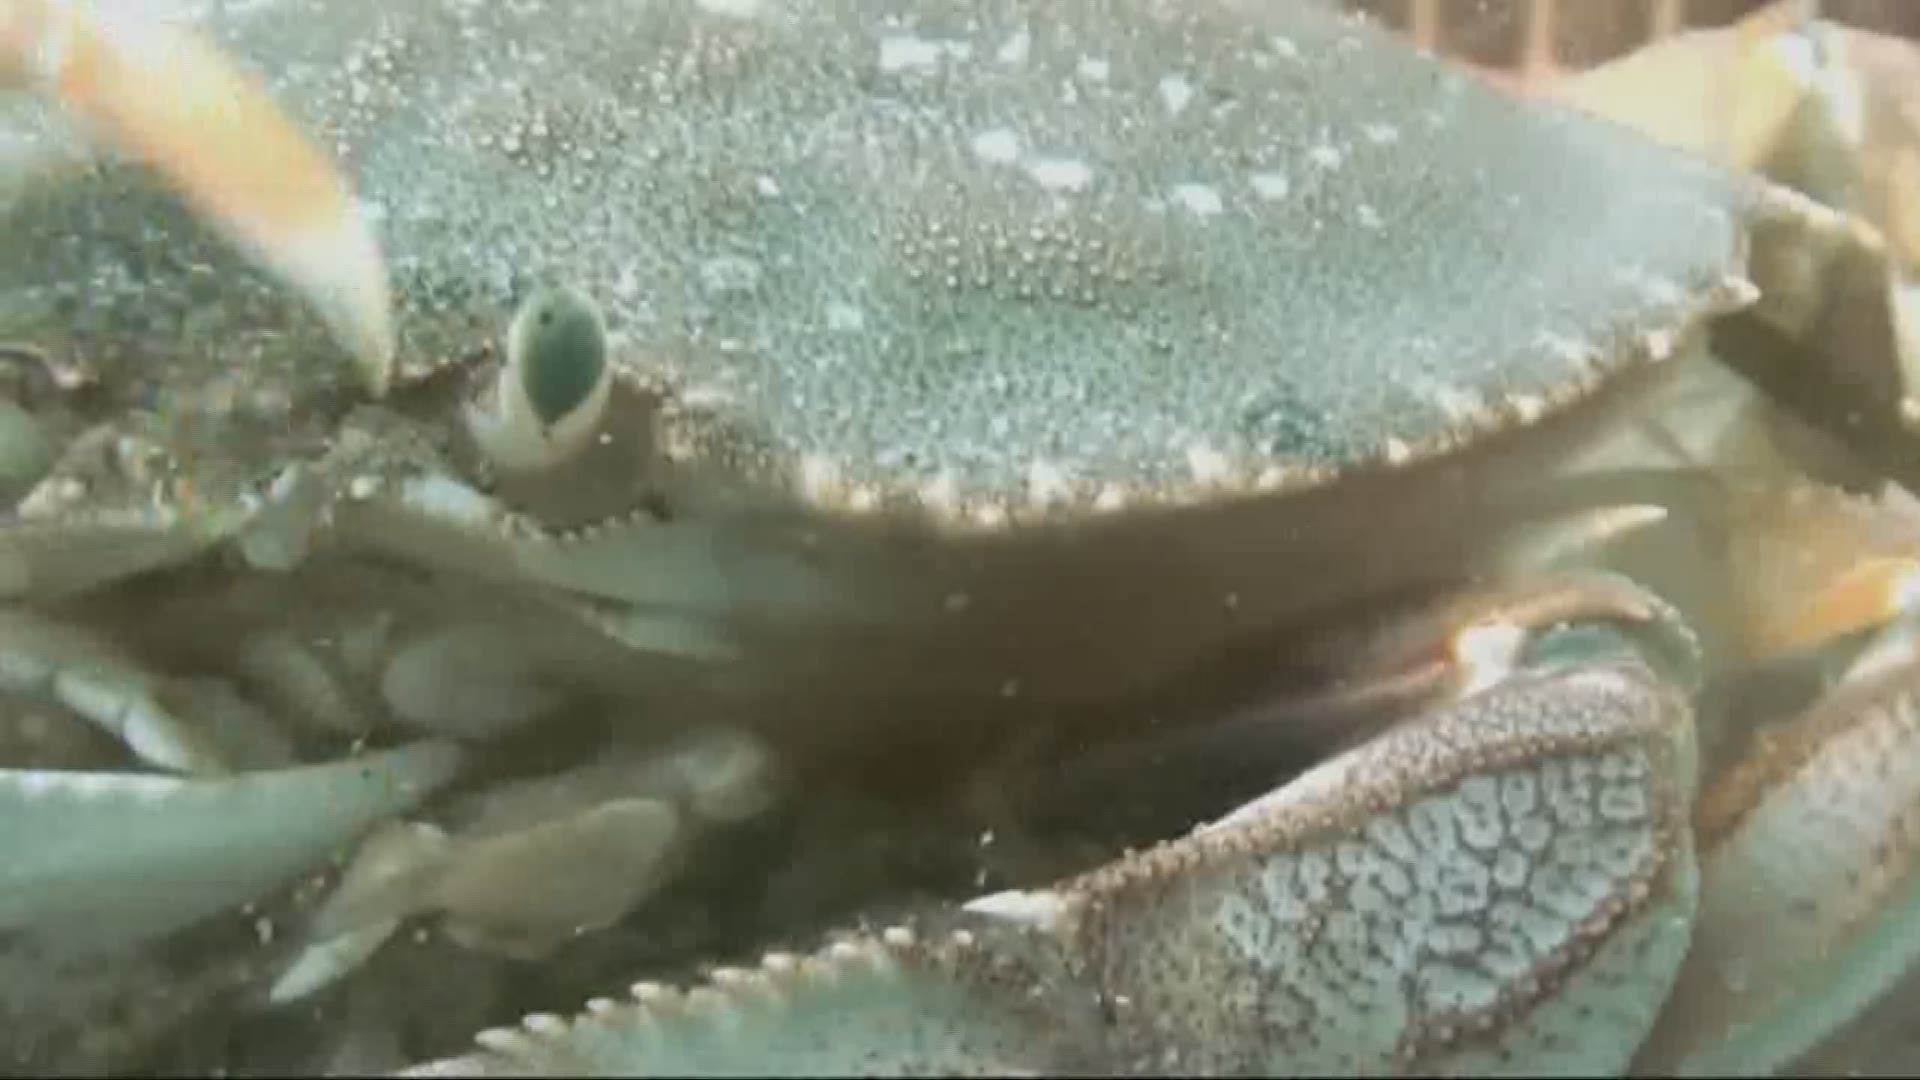 Research found that acidic water off the coasts of Oregon and Washington are damaging the shells of baby crabs.